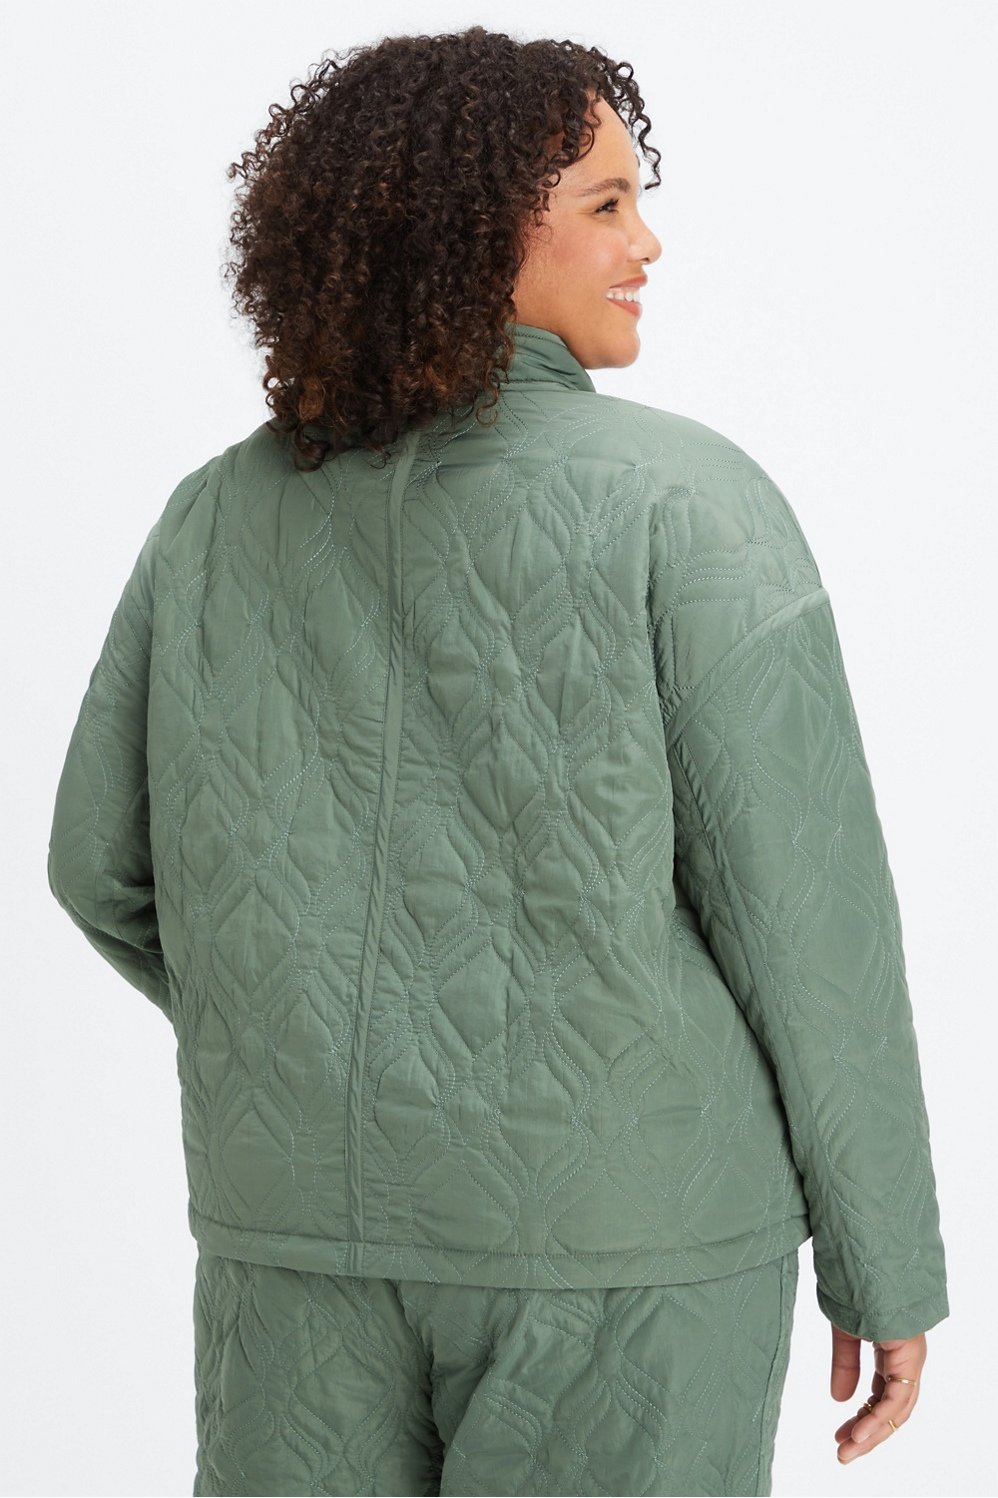 NWT Fabletics Tedi Quilted Jacket  Jackets, Quilted jacket, Womens active  jacket